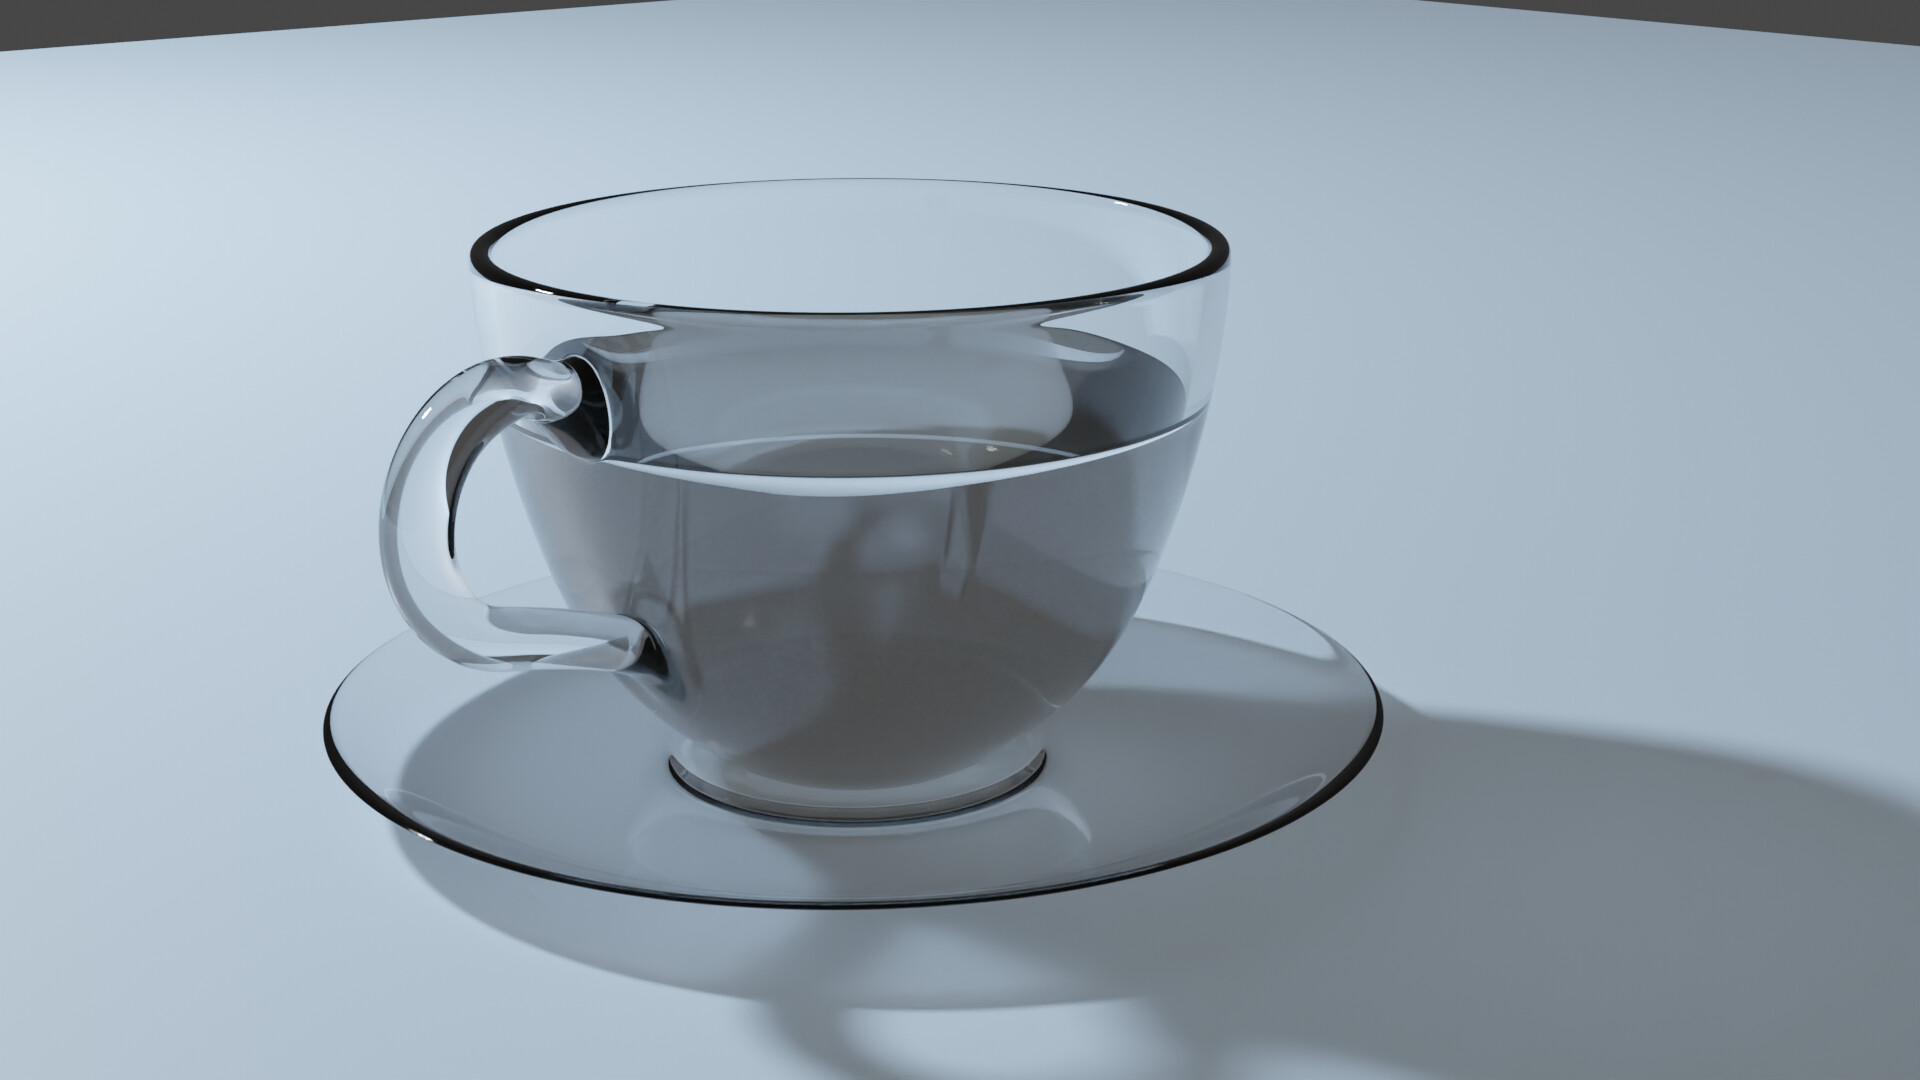 rendering - What is causing this reflection on a surface? (Blender Guru  coffee cup tutorial) - Blender Stack Exchange